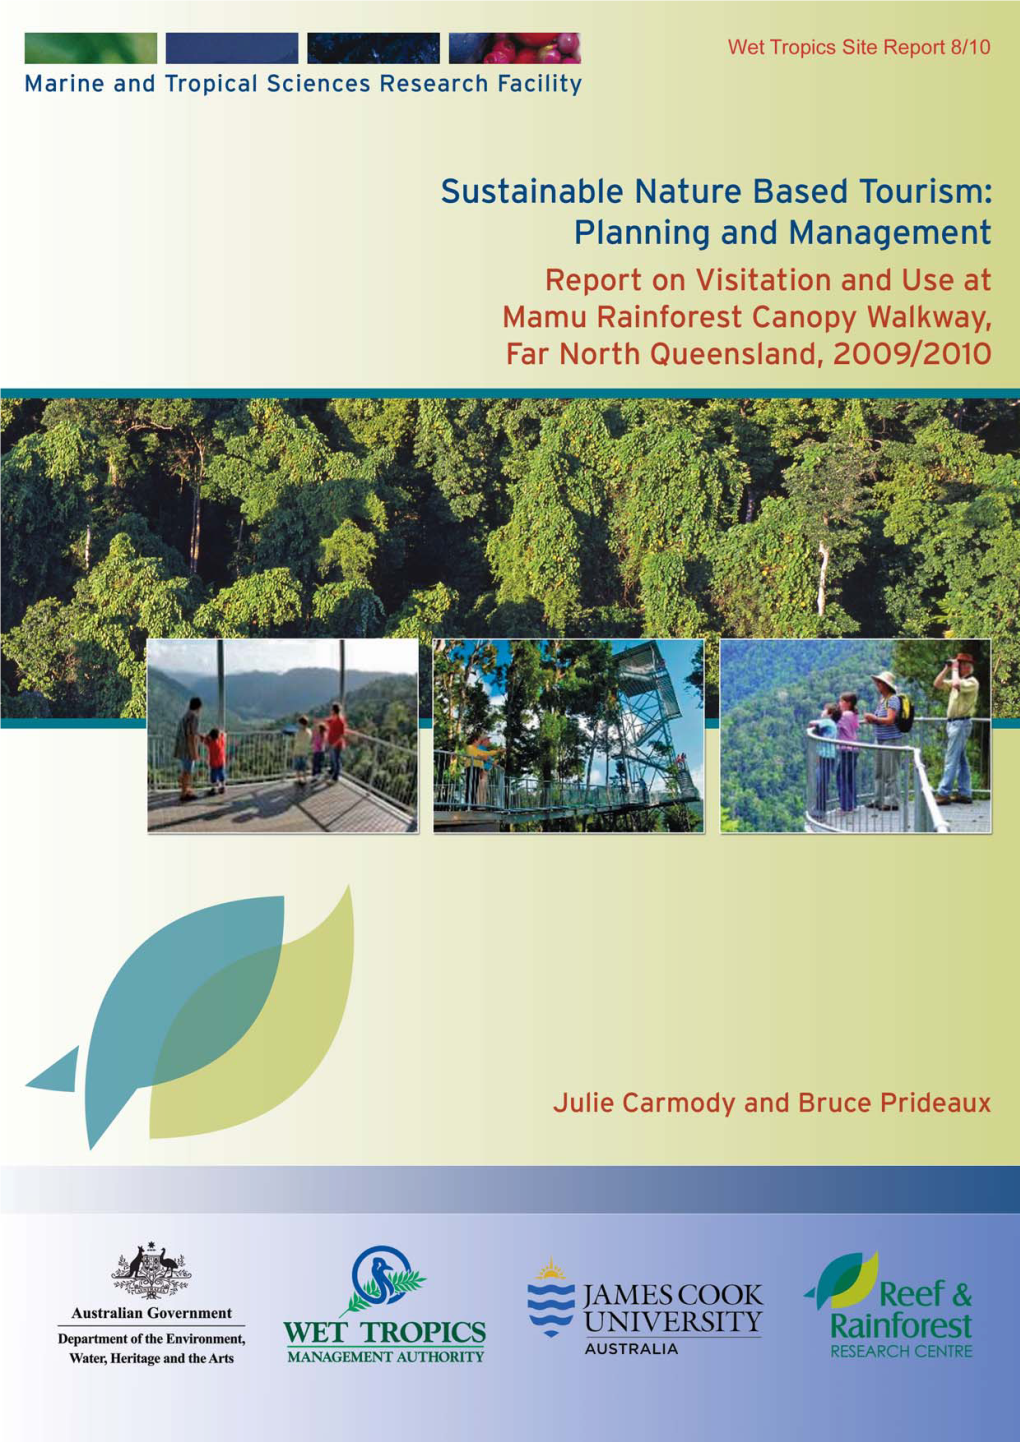 Report on Visitation and Use at Mamu Rainforest Canopy Walkway, Far North Queensland, 2009/2010